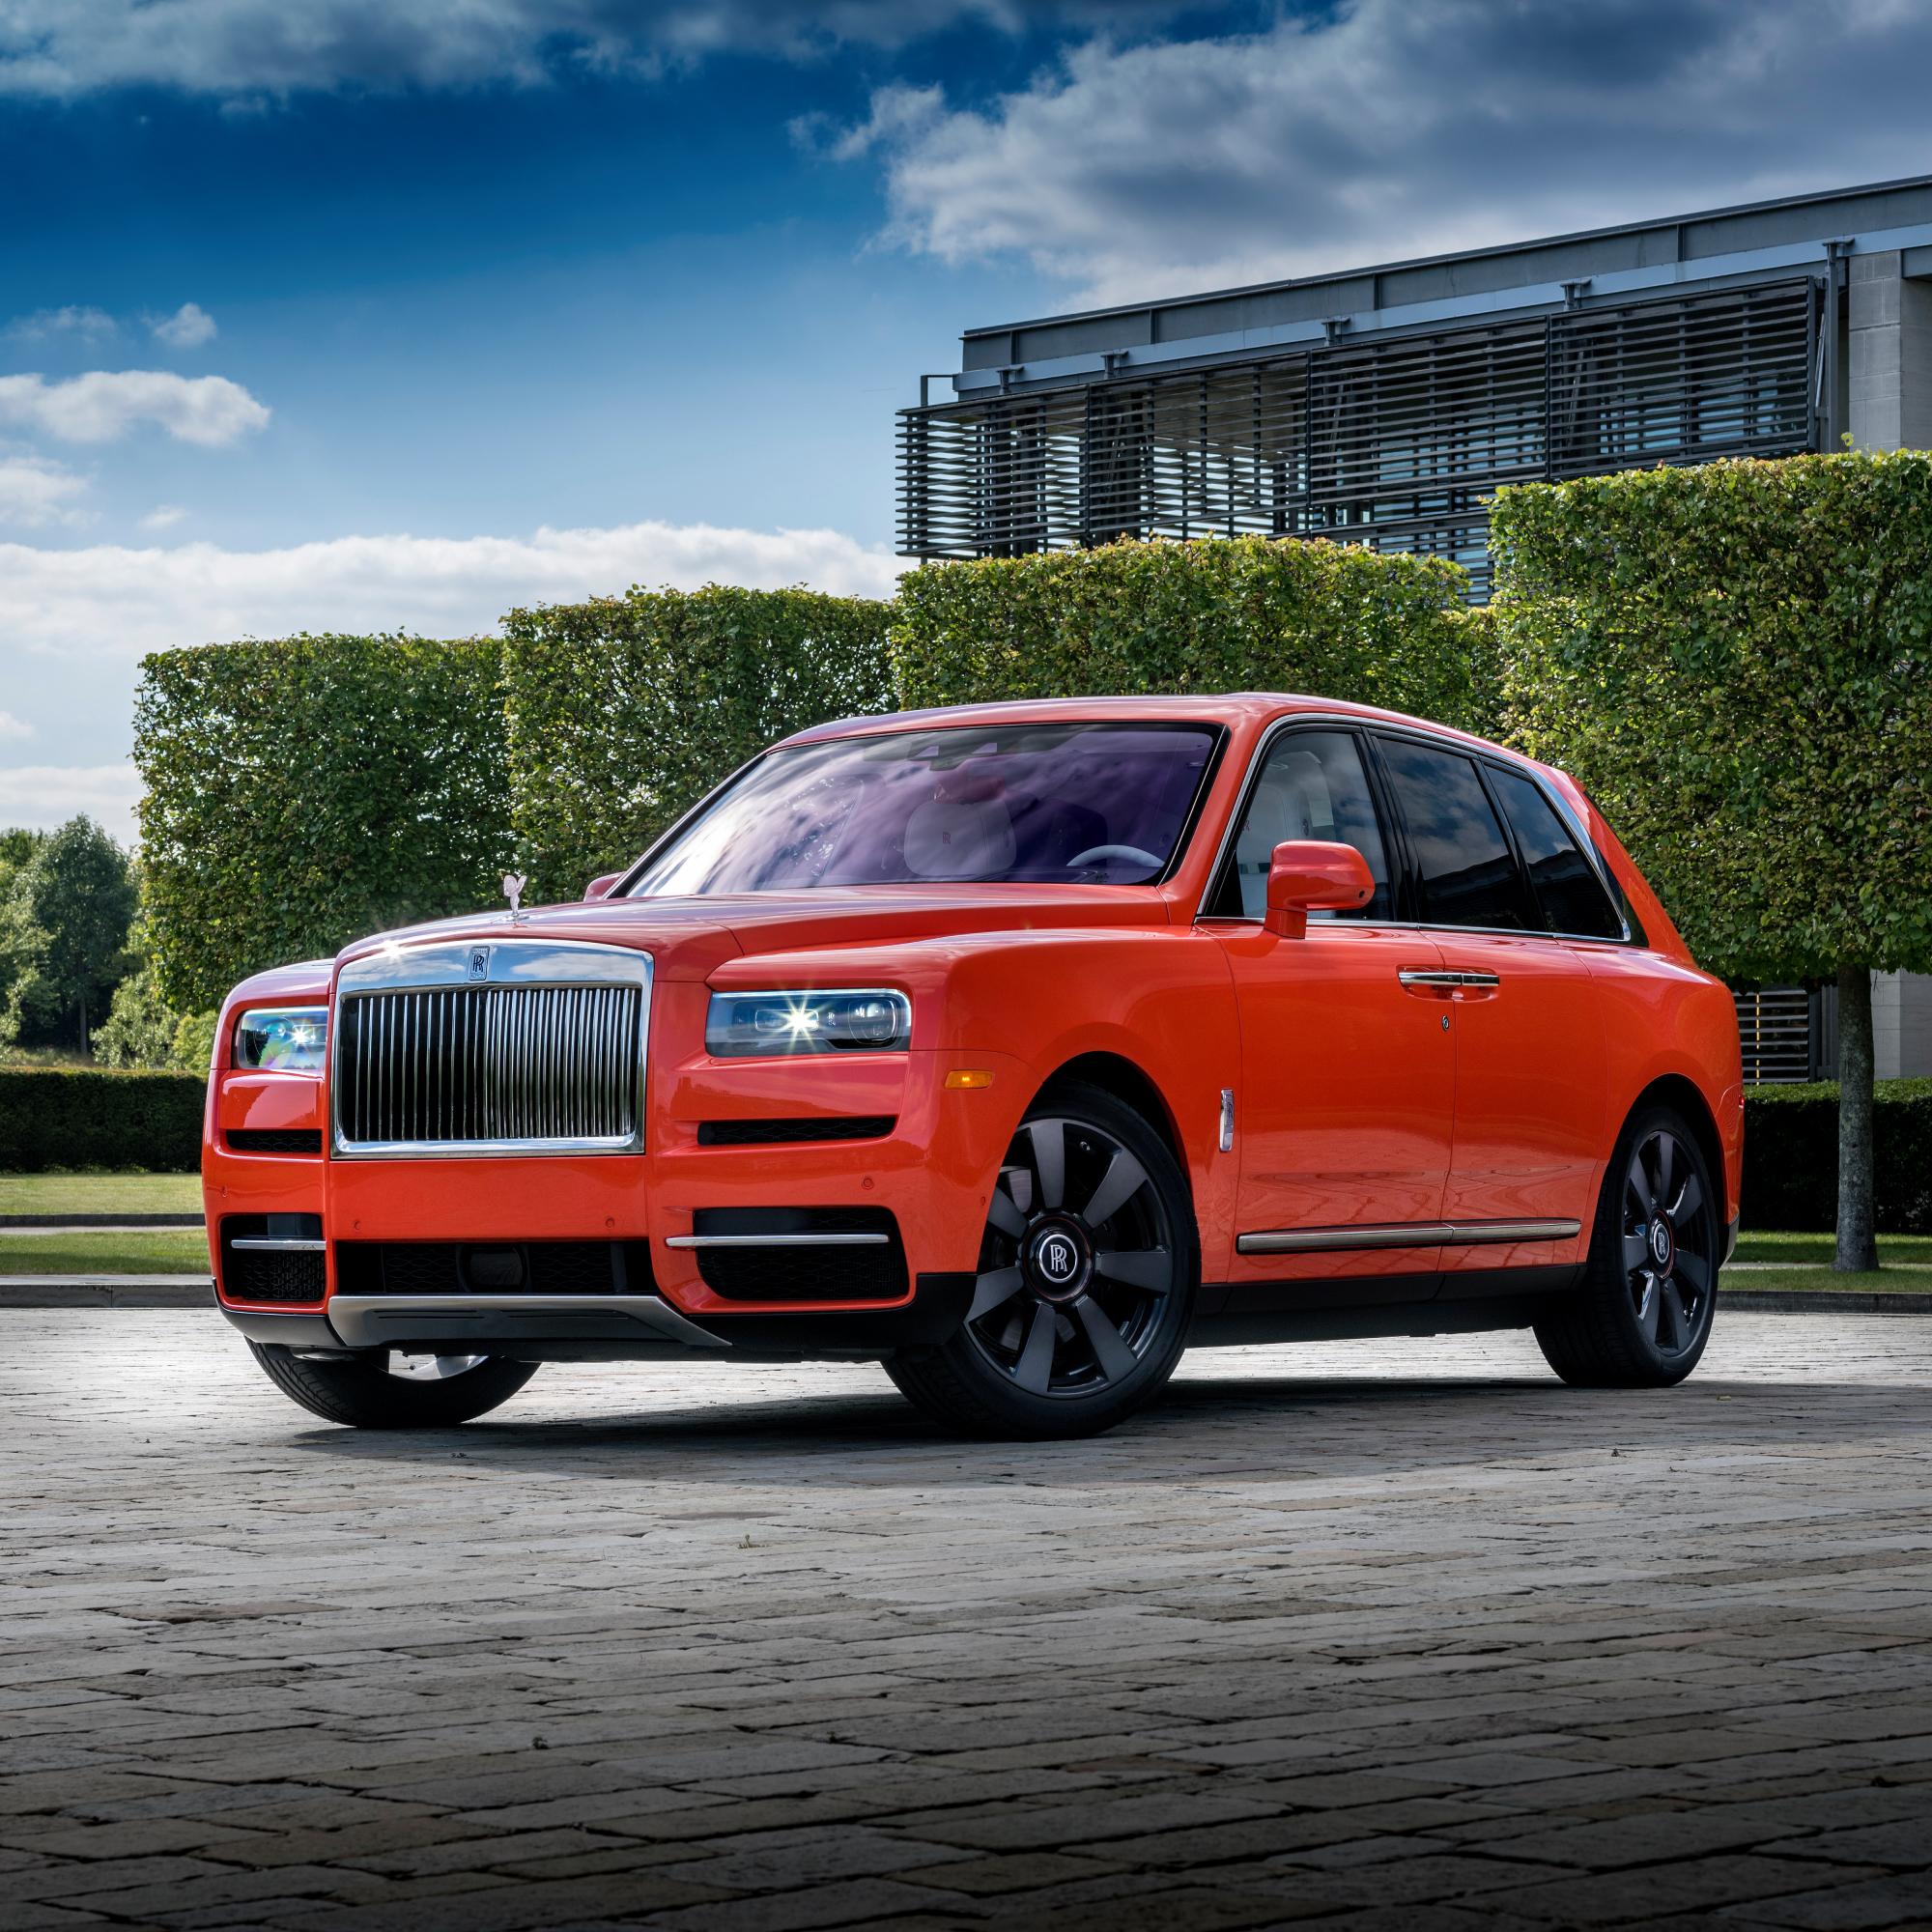 The Rolls-Royce Cullinan is a top choice for hip-hop artists when it comes to luxury SUVs.